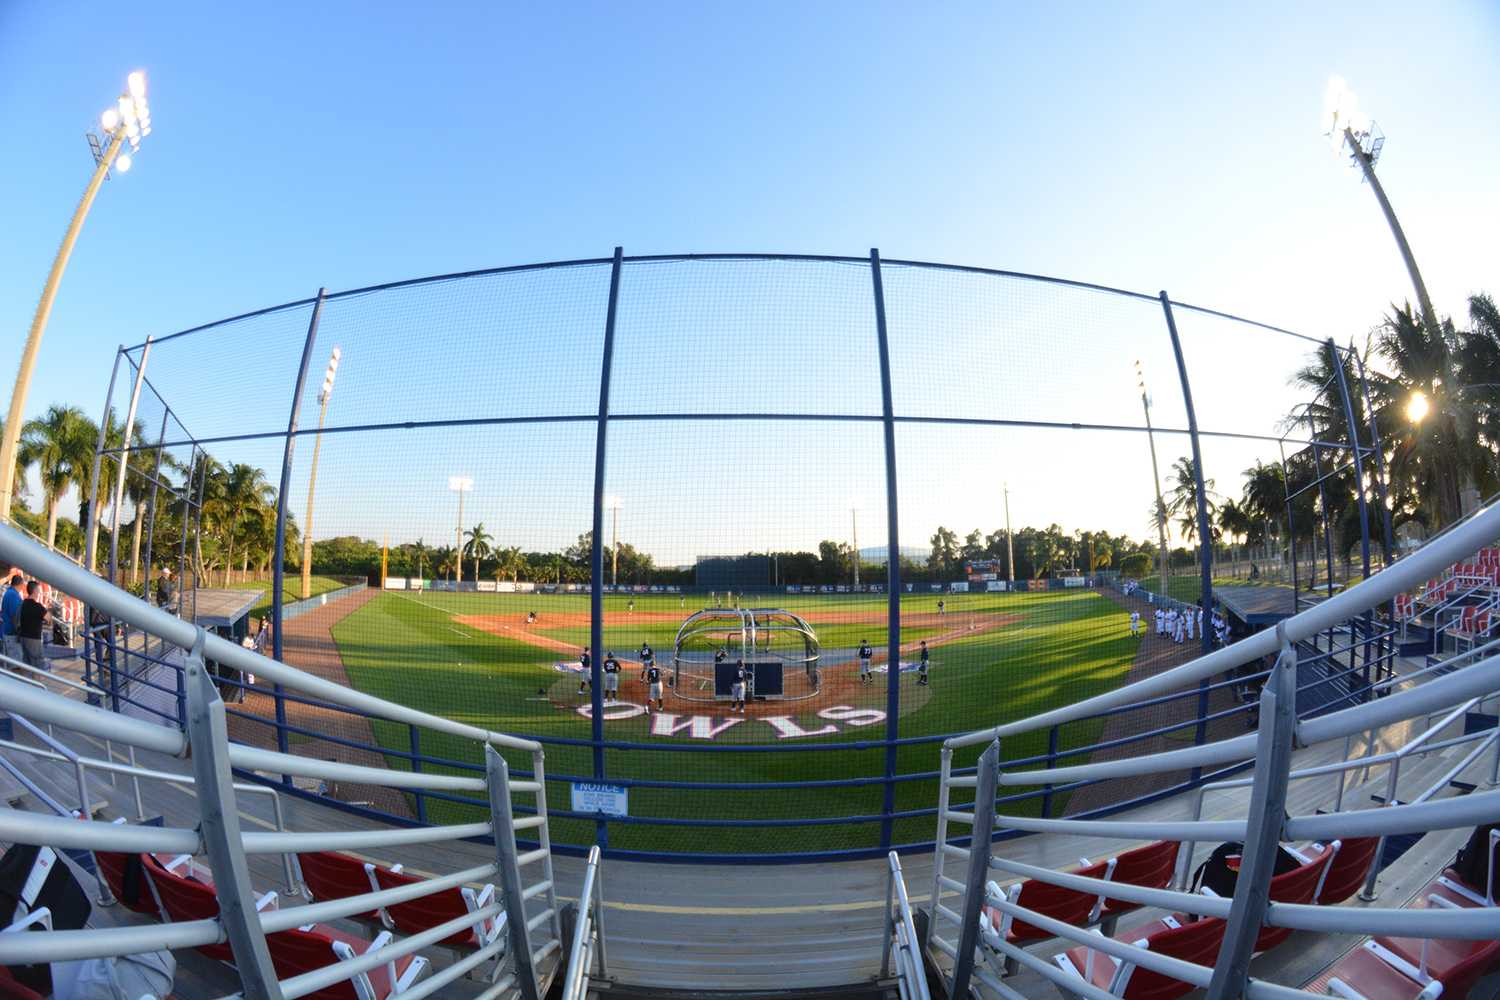 FAU Baseball opened its gates Friday, Feb. 13 for the start of the 2015 season against the University of Connecticut Huskies.  